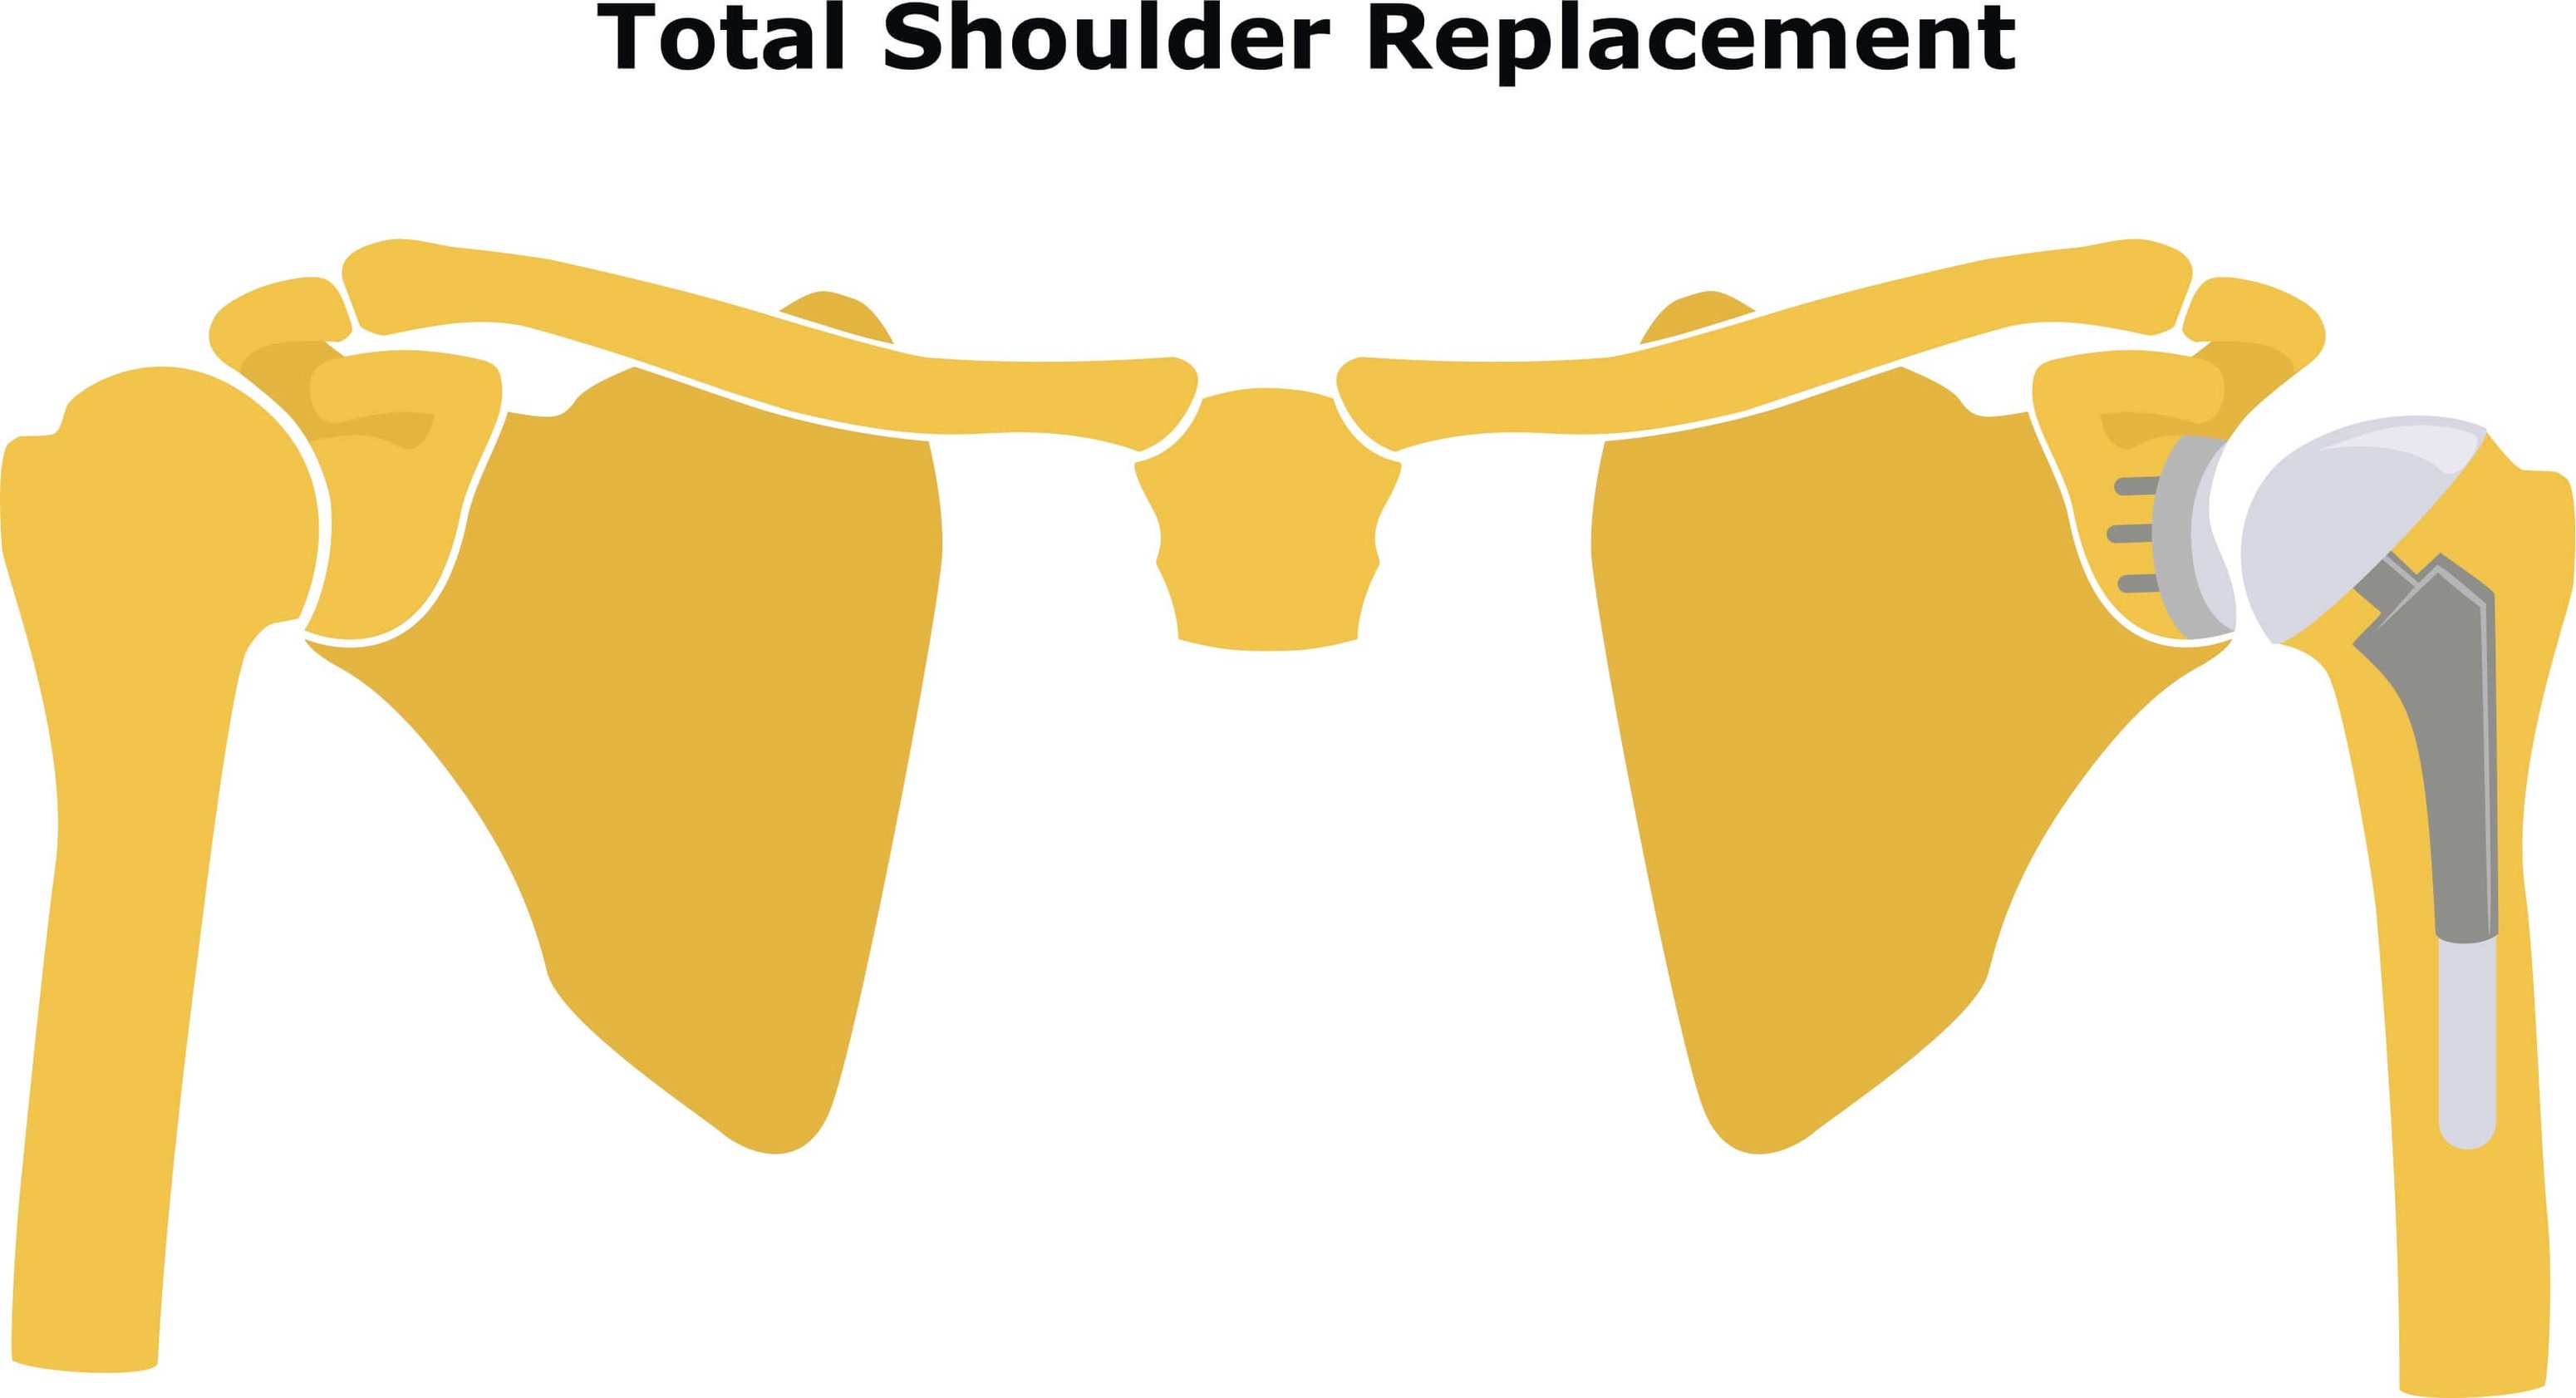 Anatomical Shoulder Replacement[47]